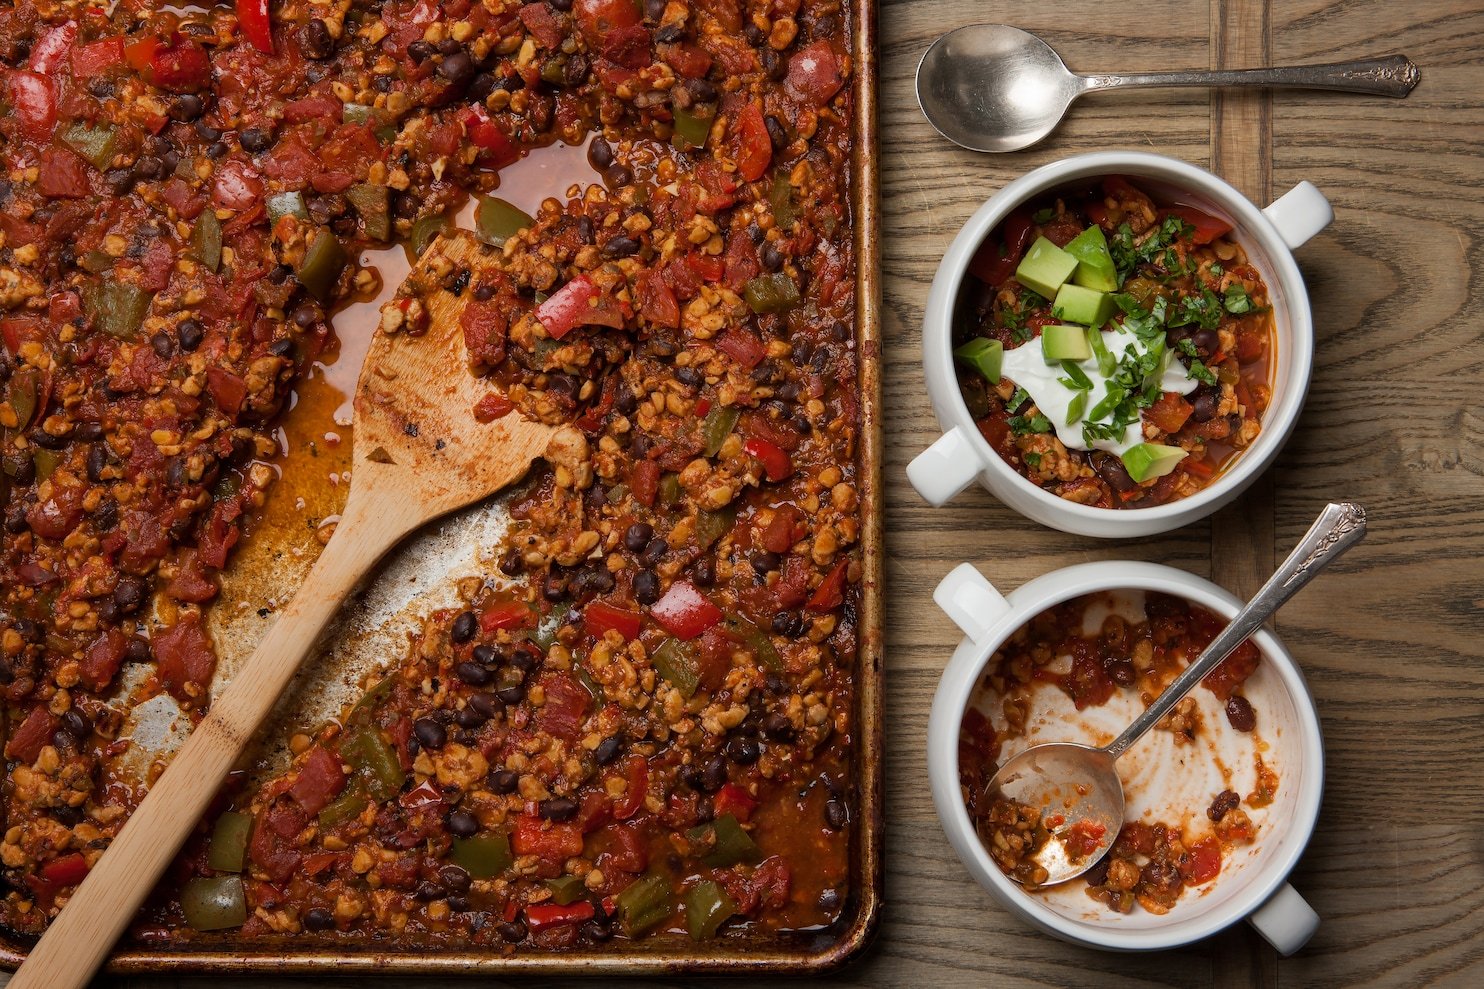 Why would you want to make chili in a sheet pan? Flavor.